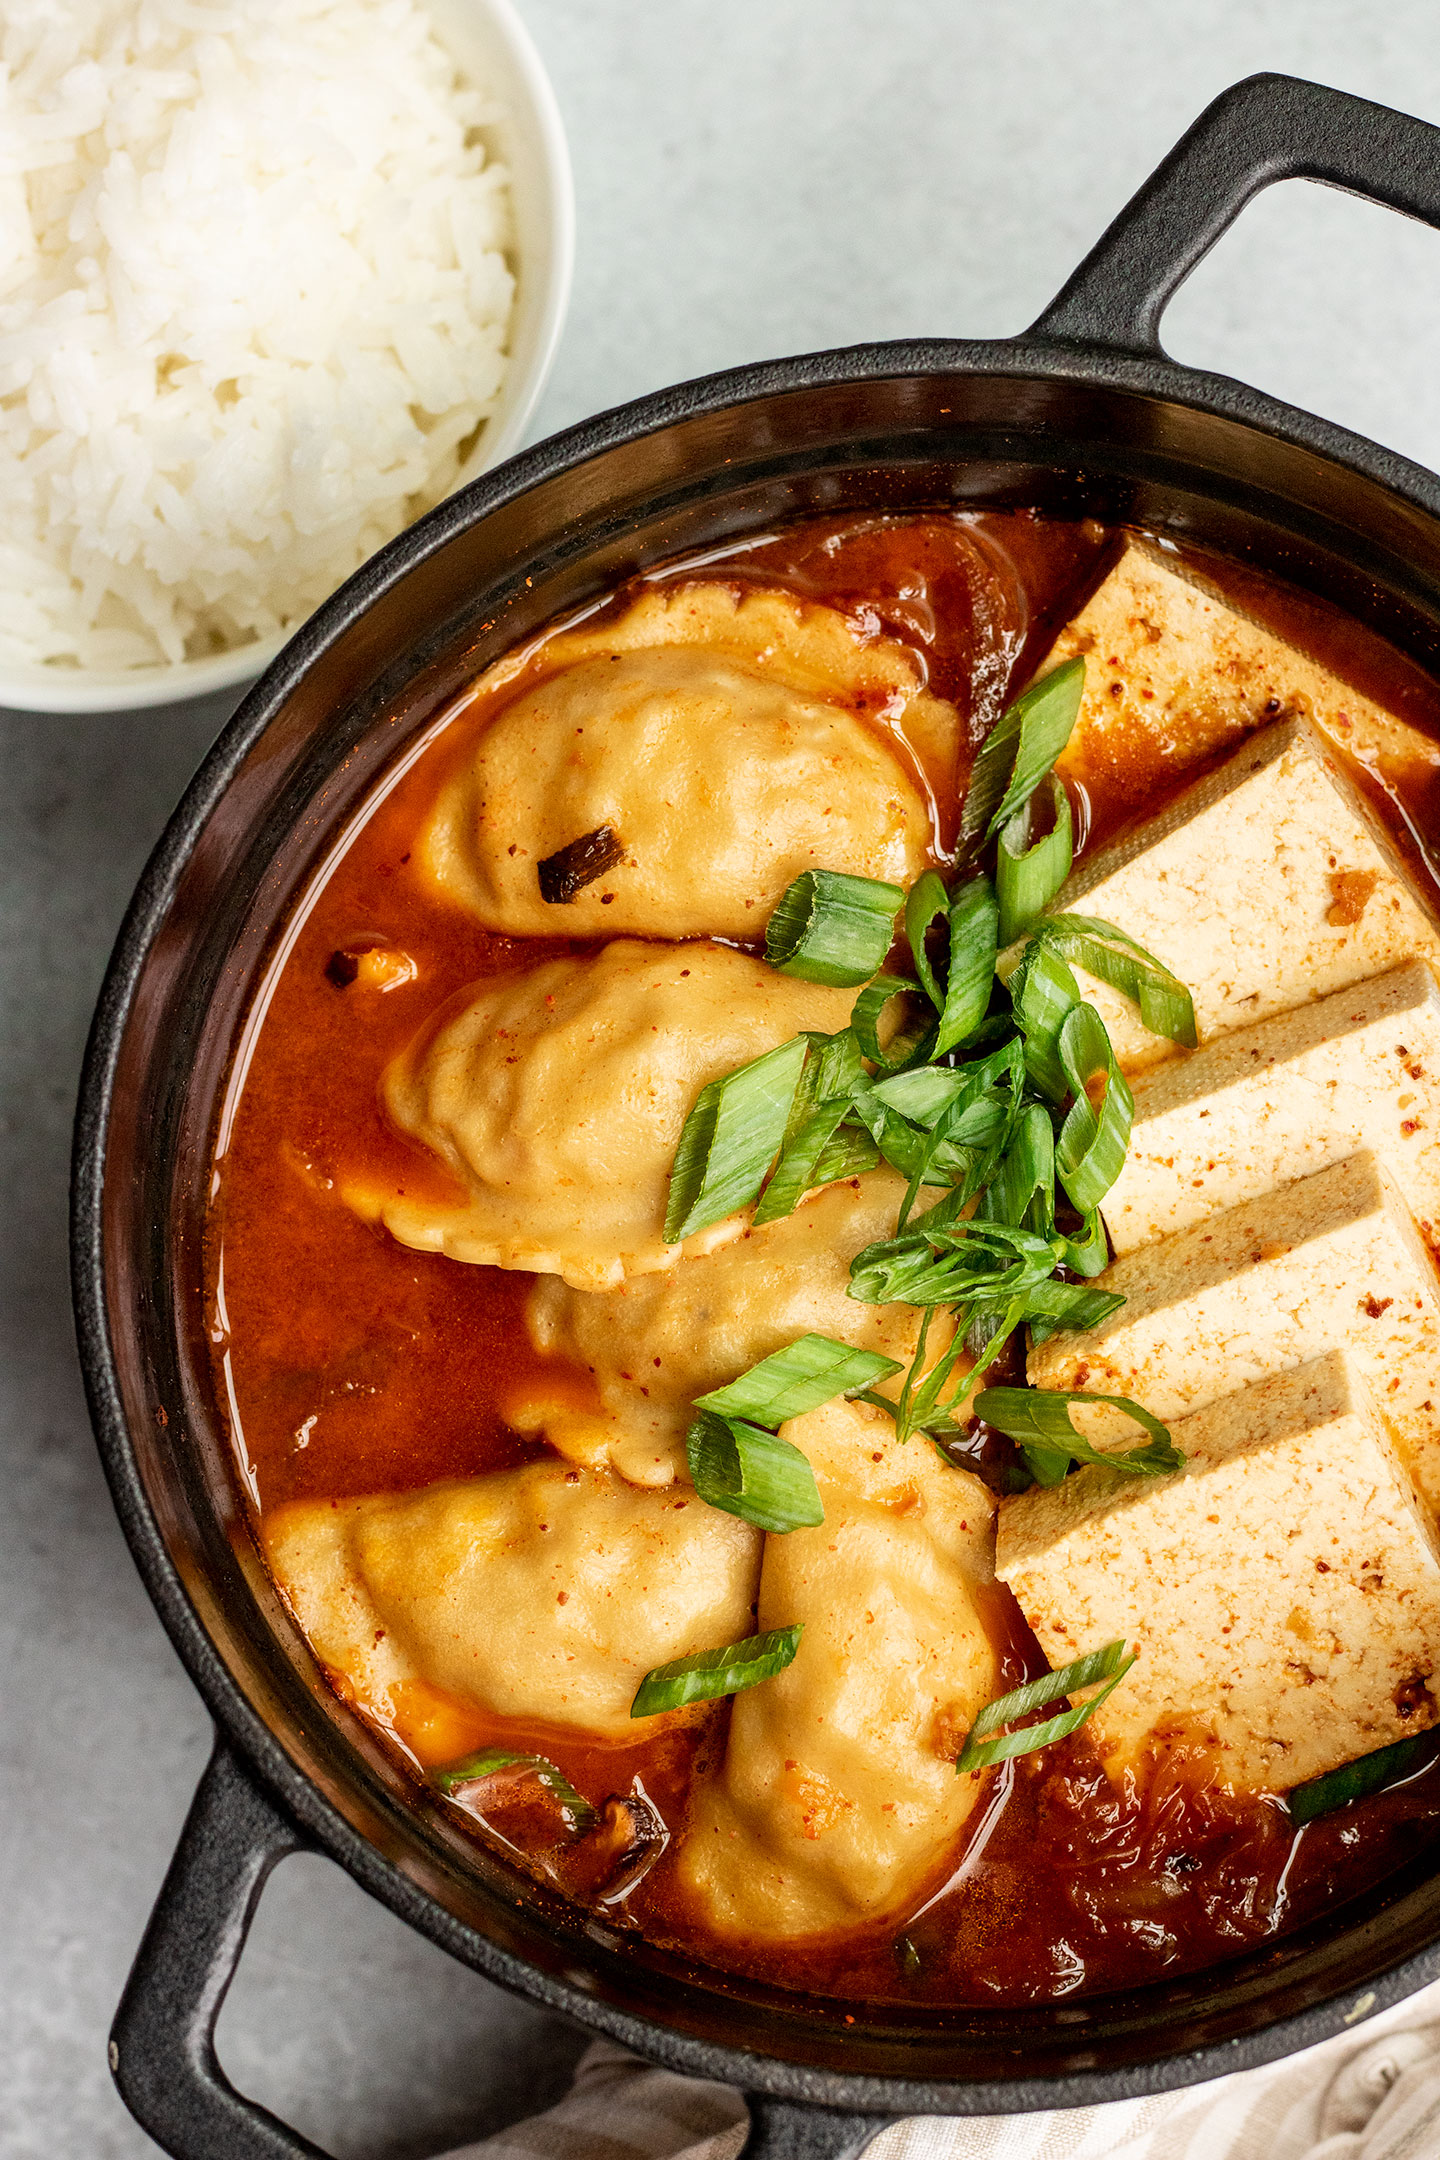 Pot with kimchi stew topped with tofu squares, dumplings and topped with scallions.